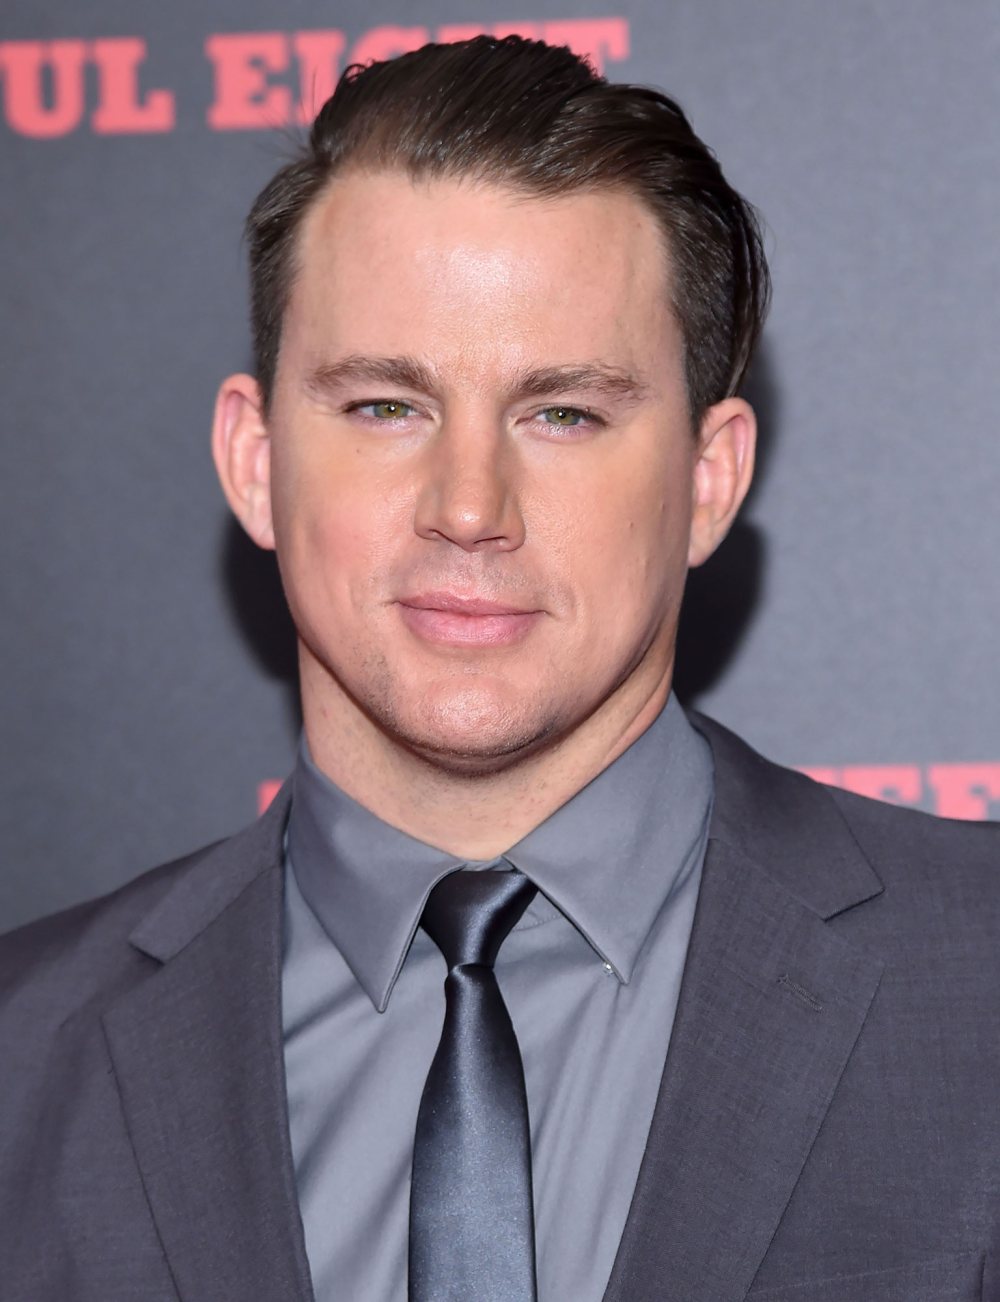 Channing Tatum Is Making This Dad’s Heartbreaking Story Into a Movie channing tatum 2015